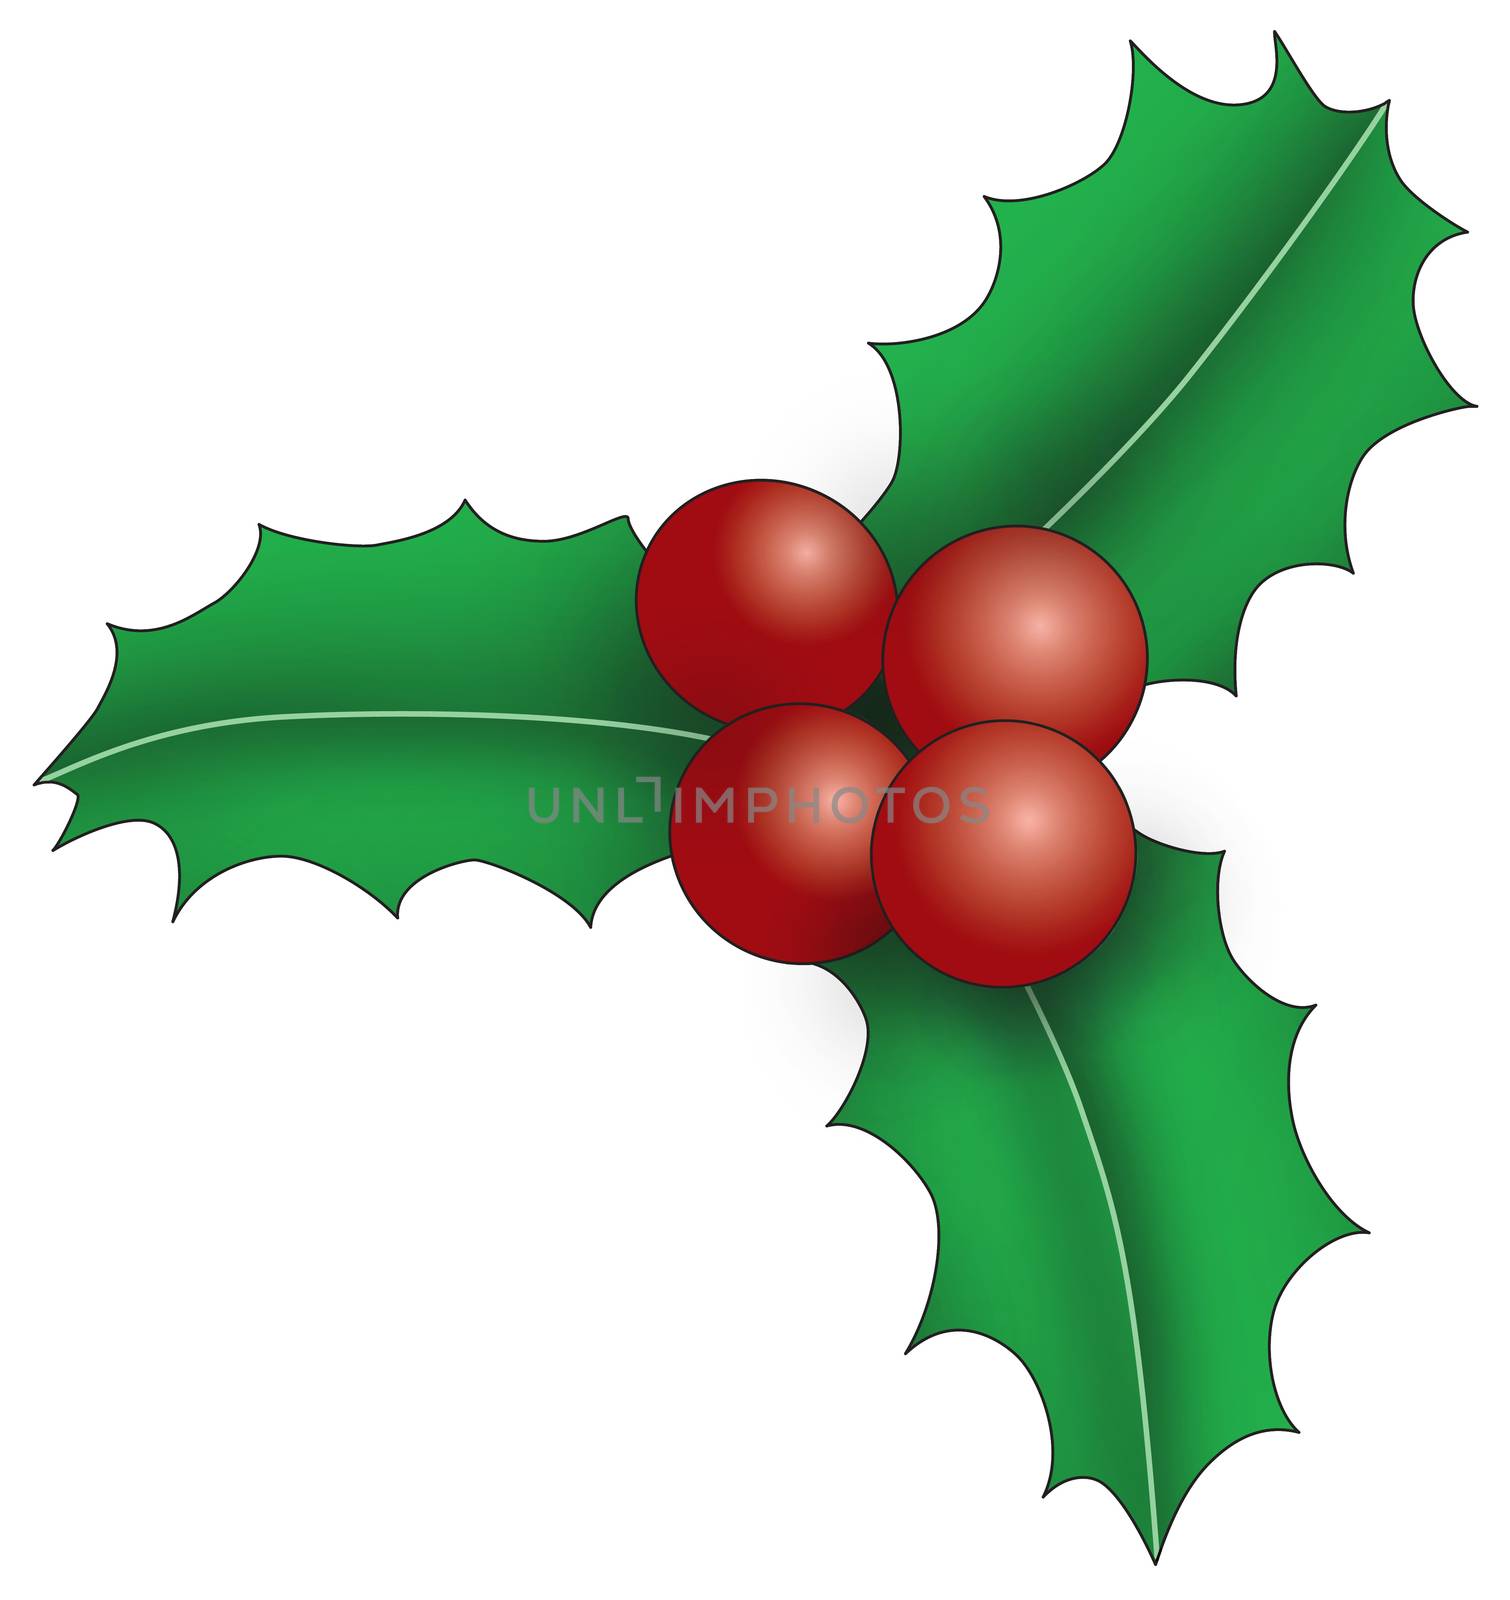 Illustration of three holly leaves with berries